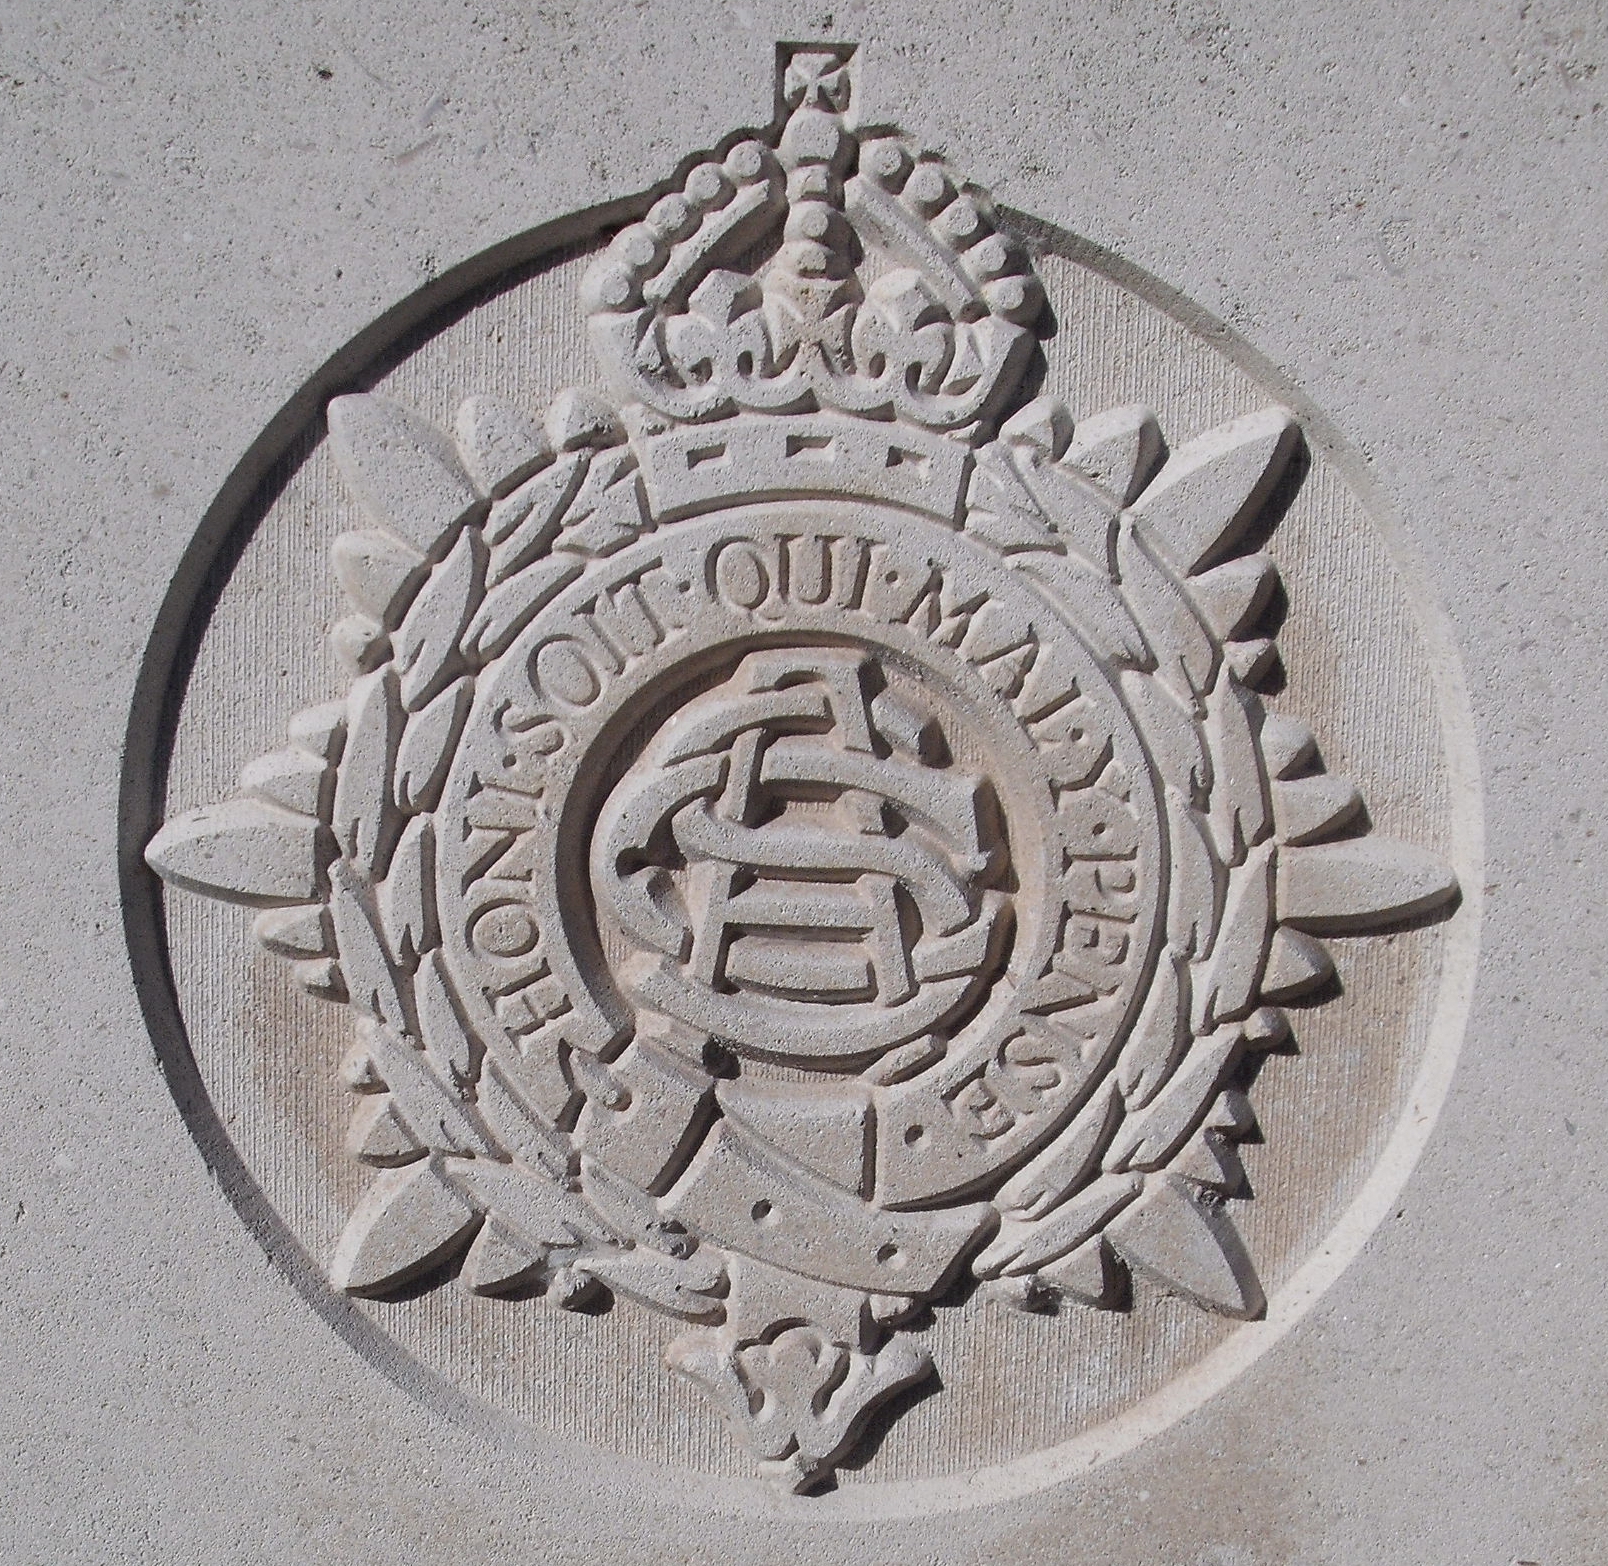 Capbadge of the Army Service Corps